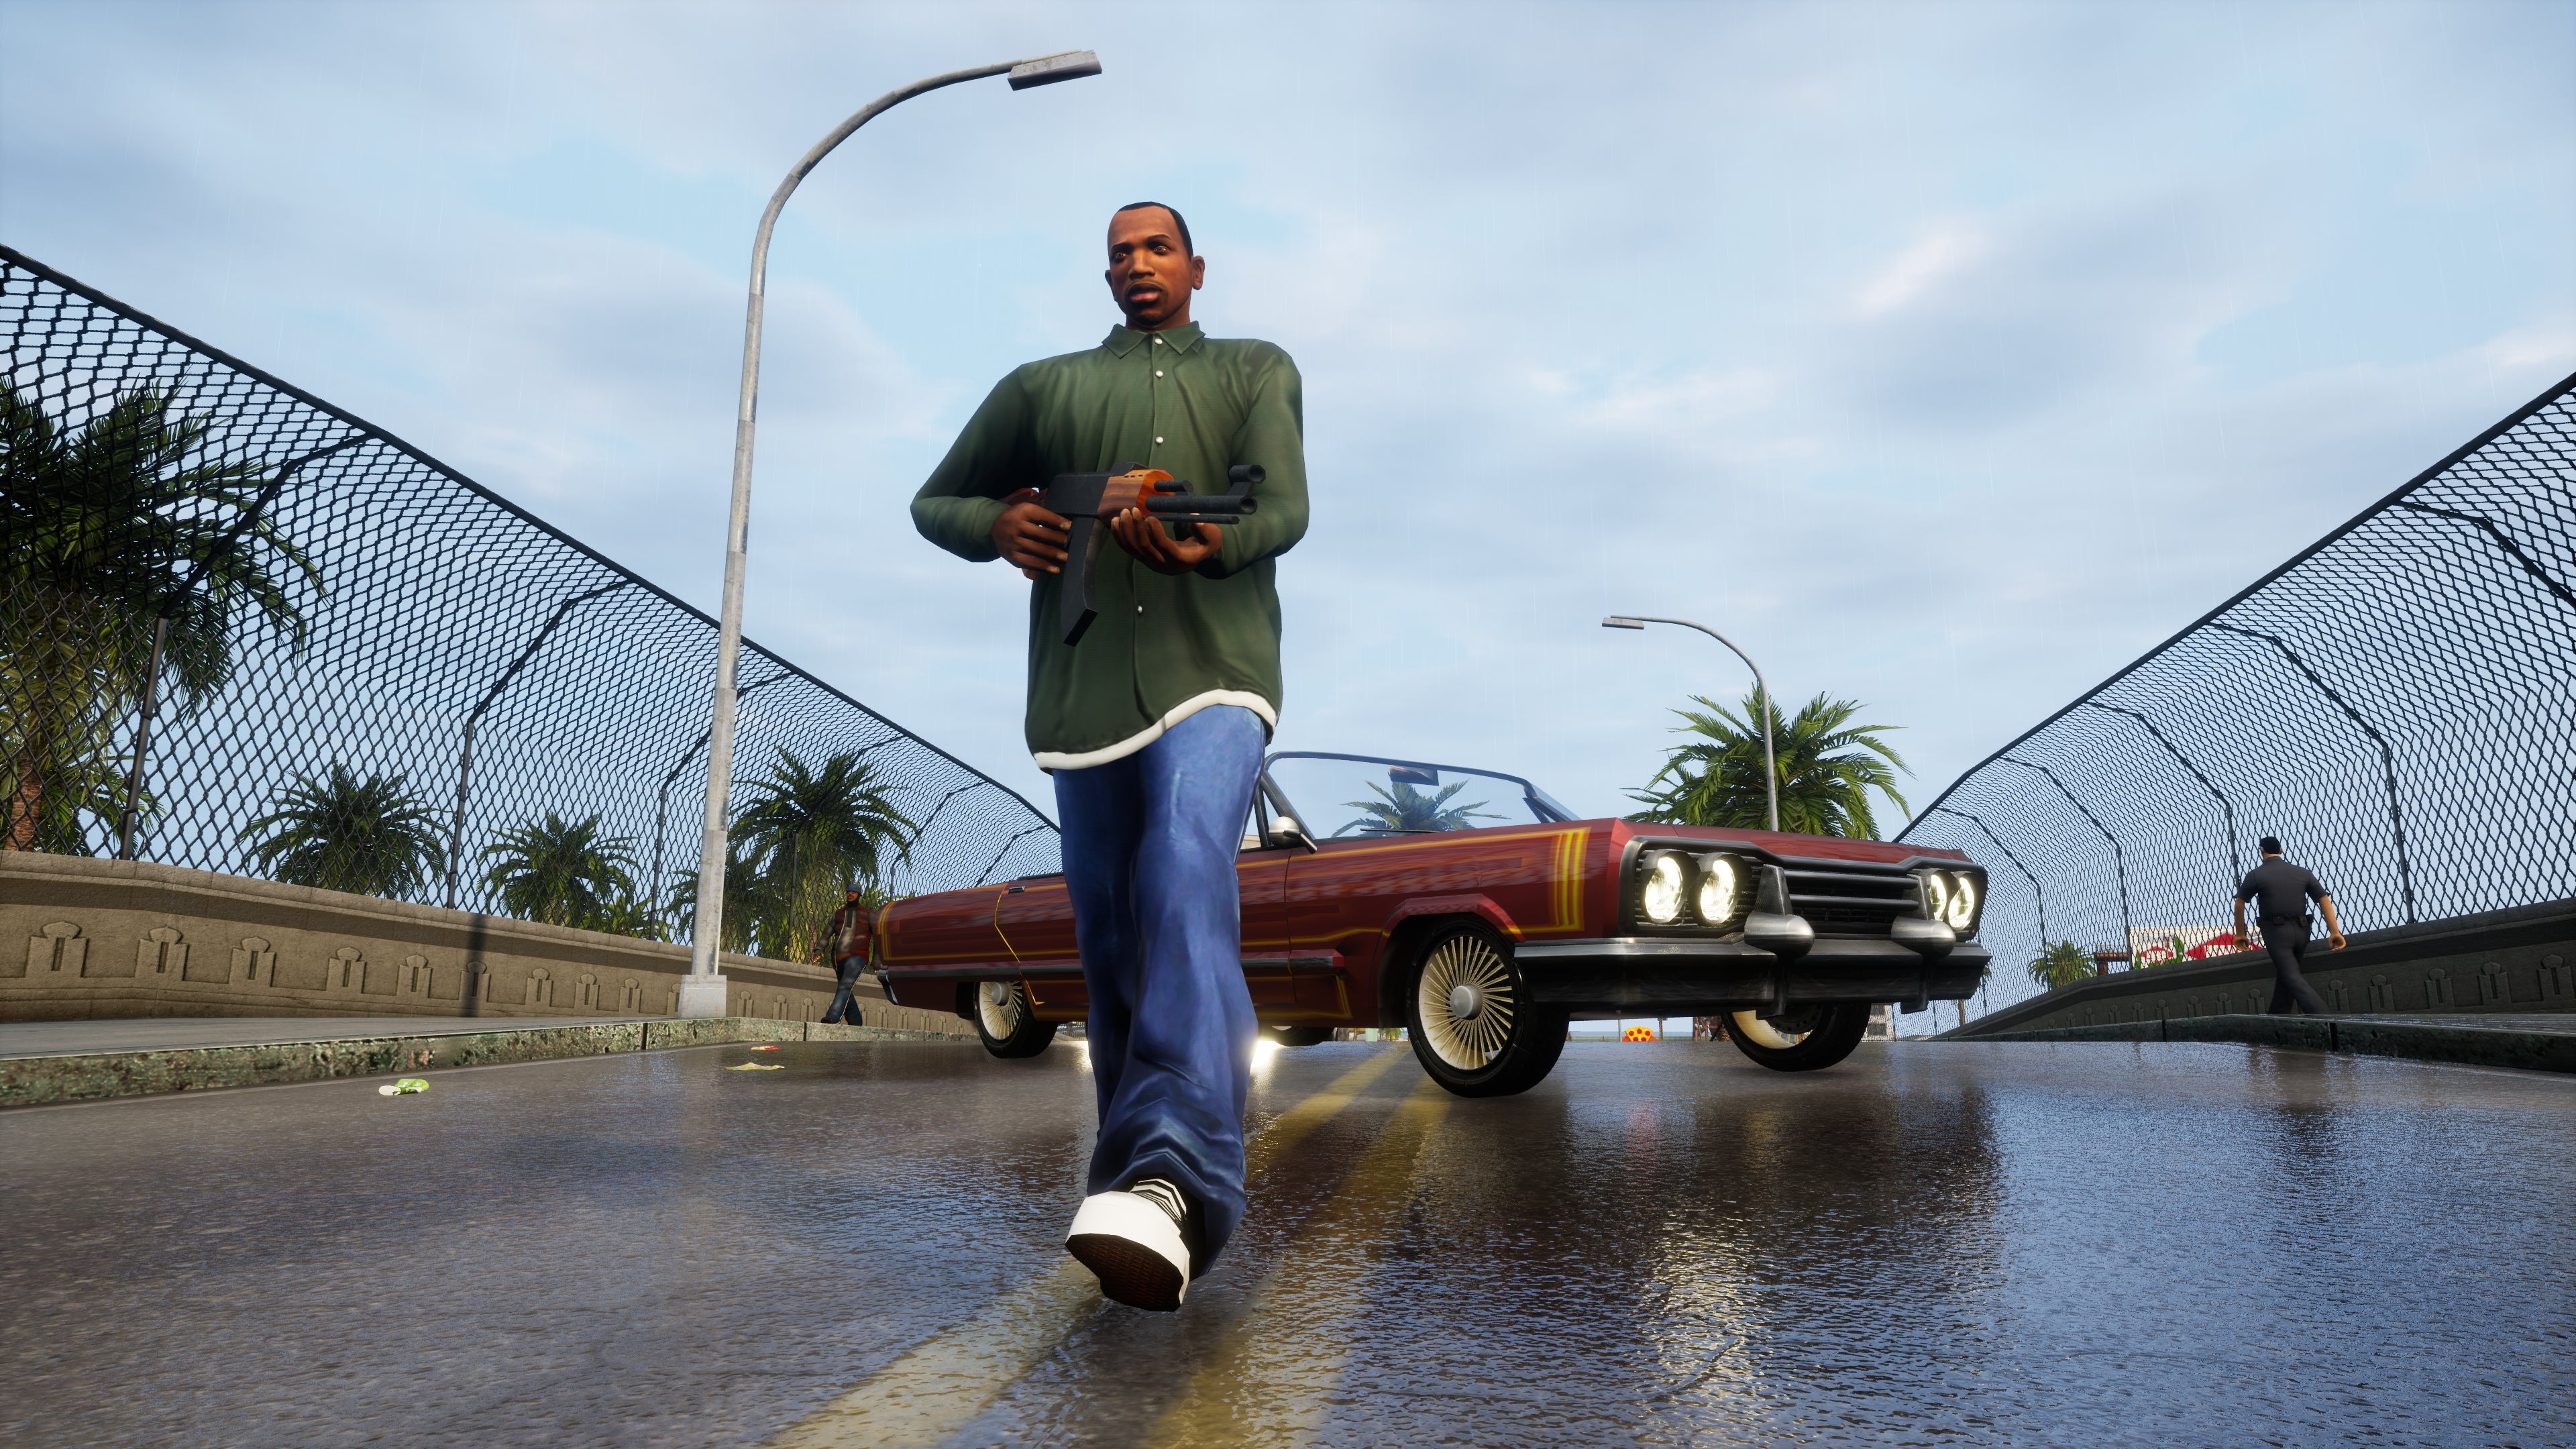 Beer Ecology item GTA San Andreas cheats - PlayStation, Xbox, PC, and Switch | VG247